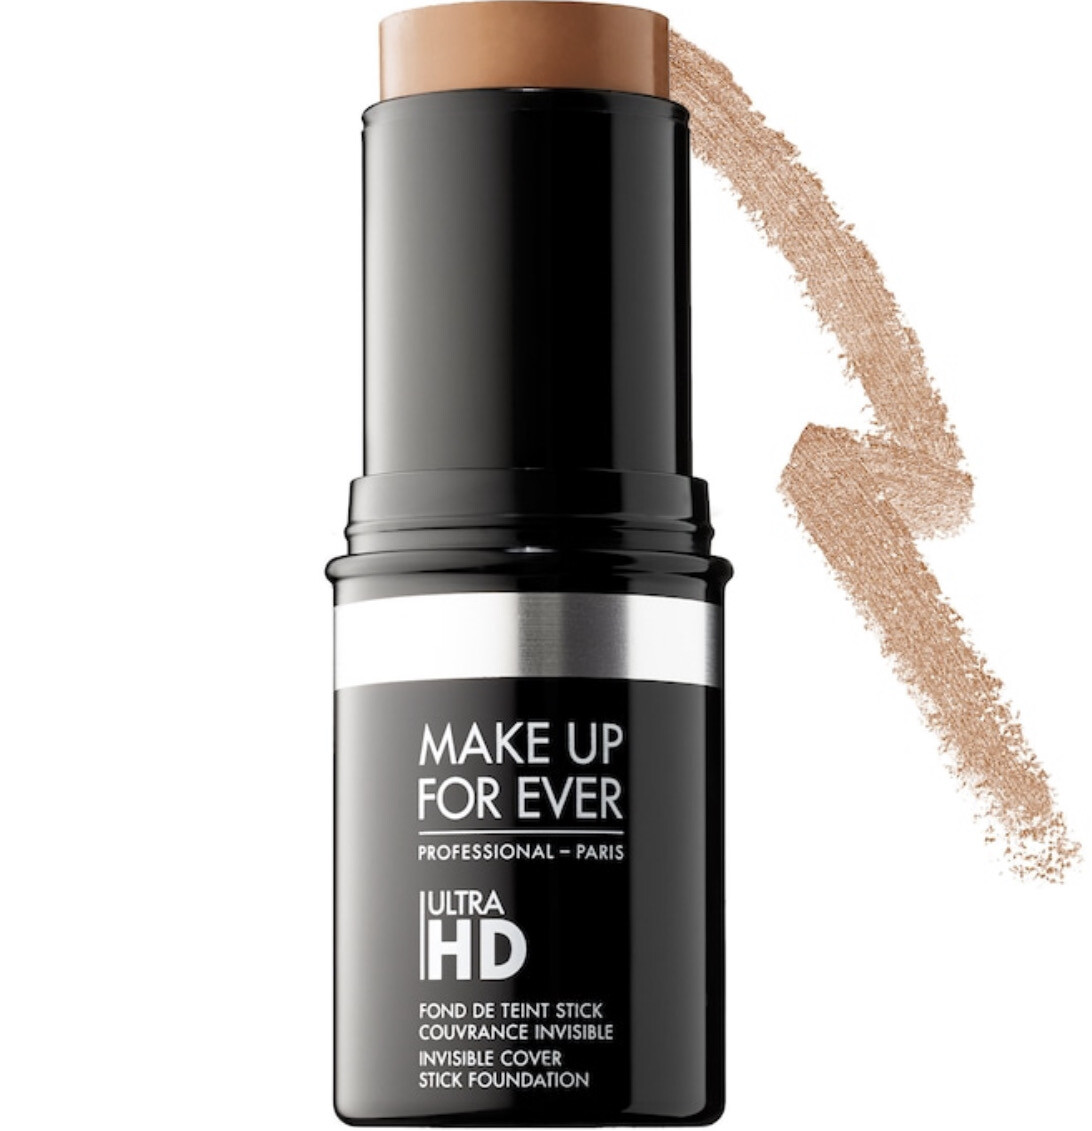 Make Up For Ever - Ultra HD Invisible Cover Stick Foundation | Y415 - Almond - for lighter tan skin with very golden undertones